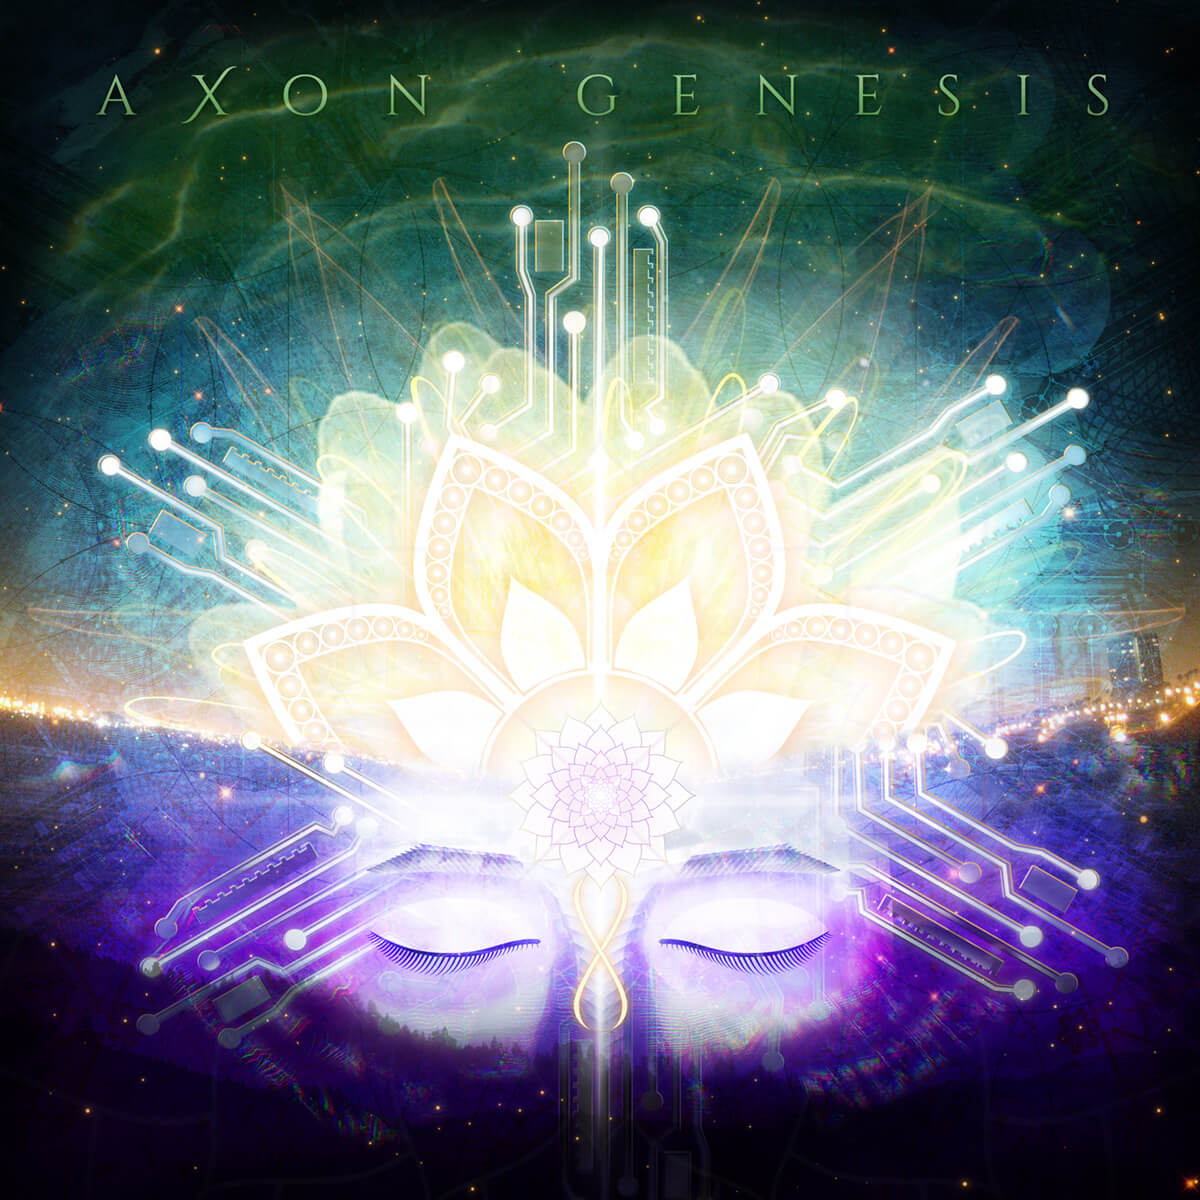 Open to Infinity Music, Cover Art and Timelapse Video by Axon Genesis